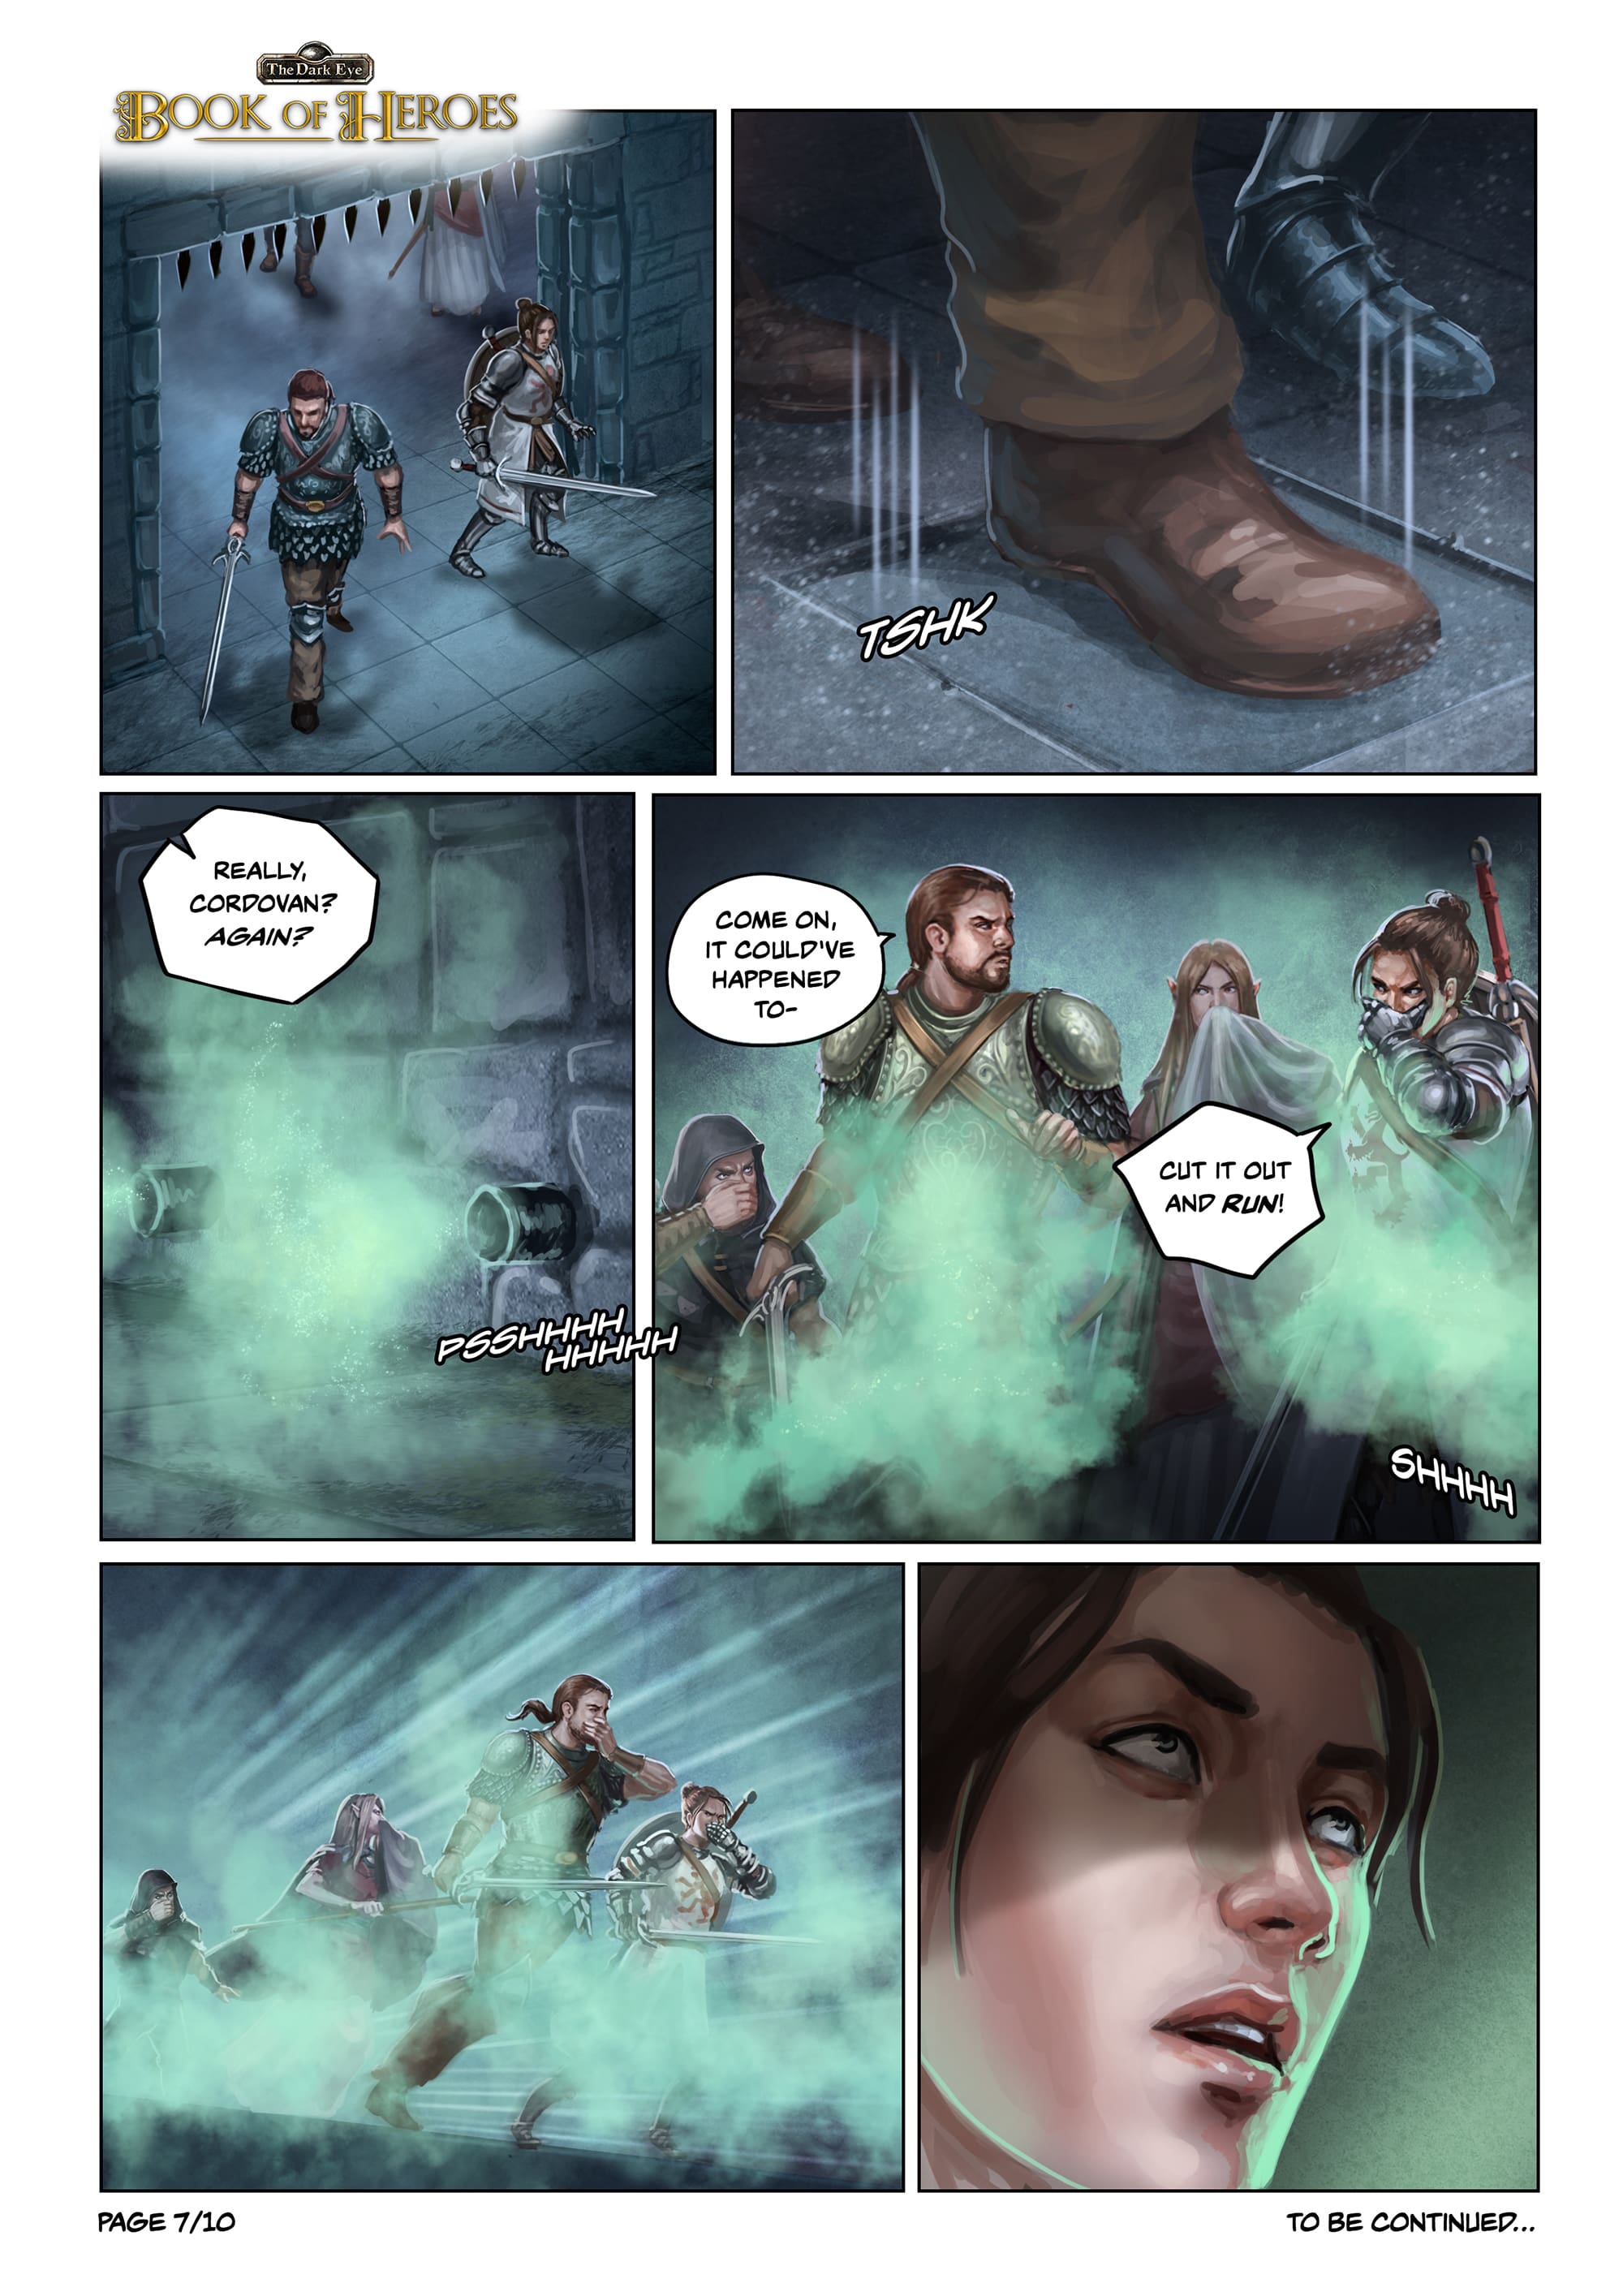 Book of Heroes Chapter 1 Page 7